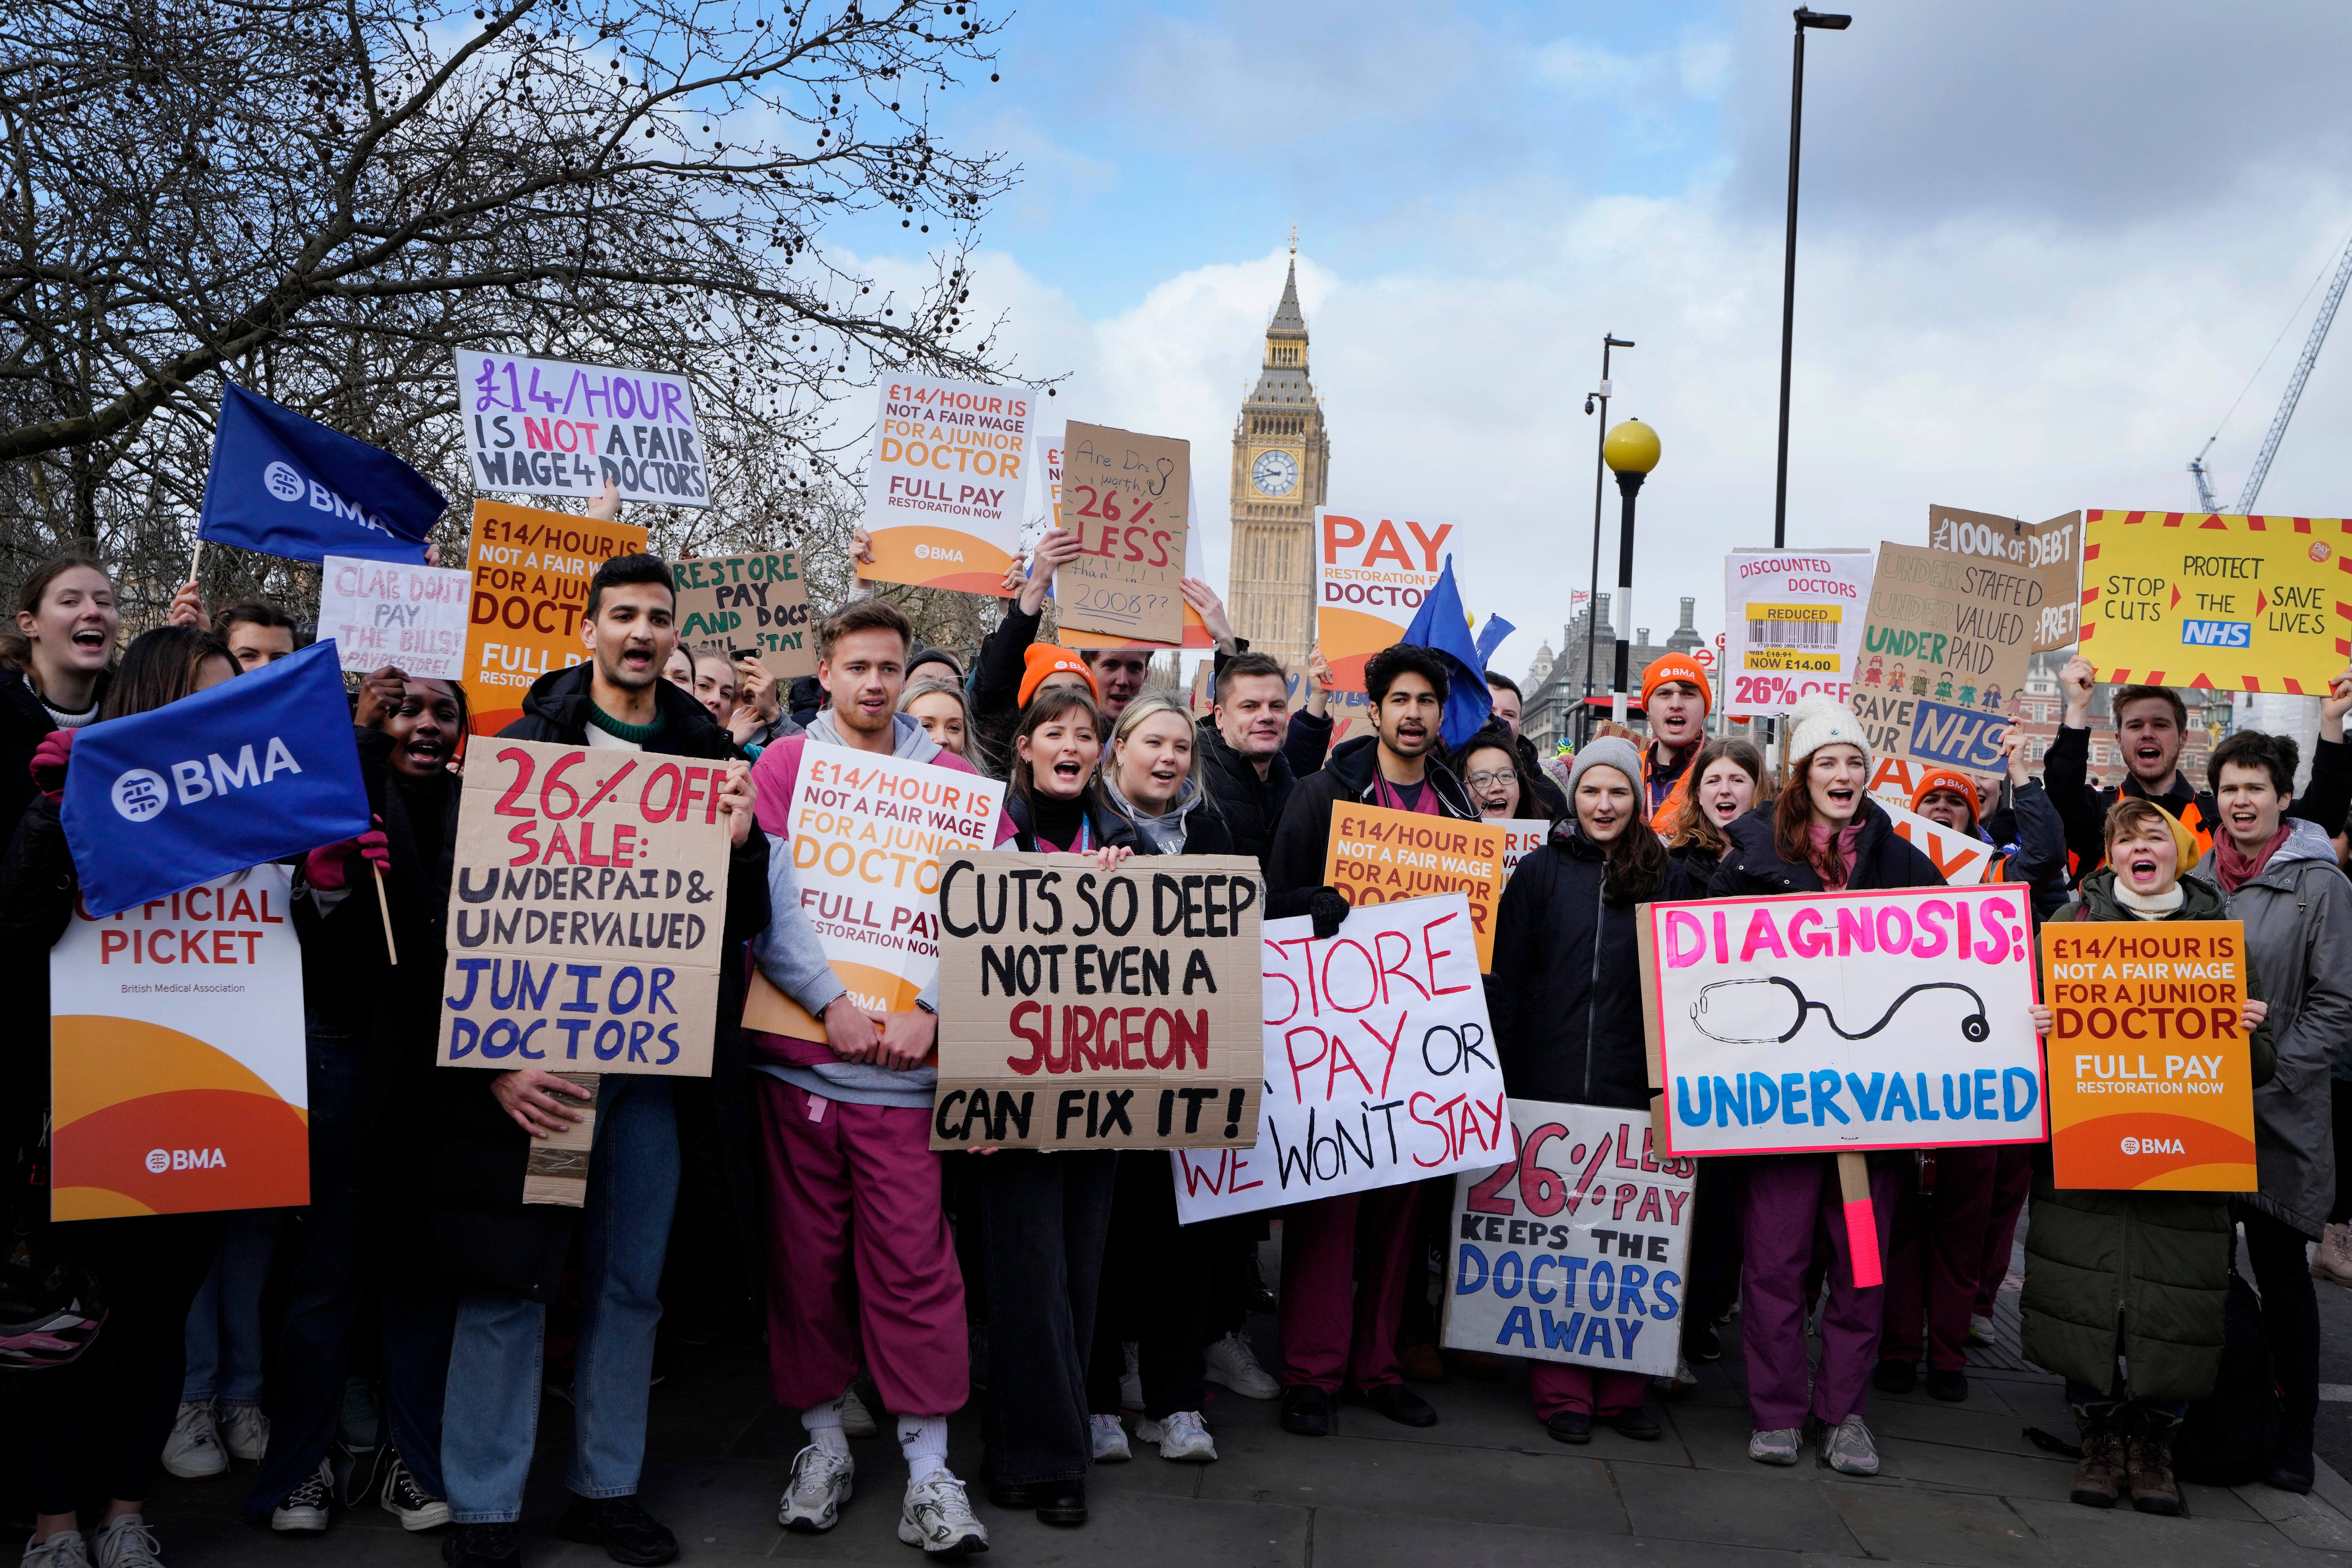 Junior doctors are striking over pay